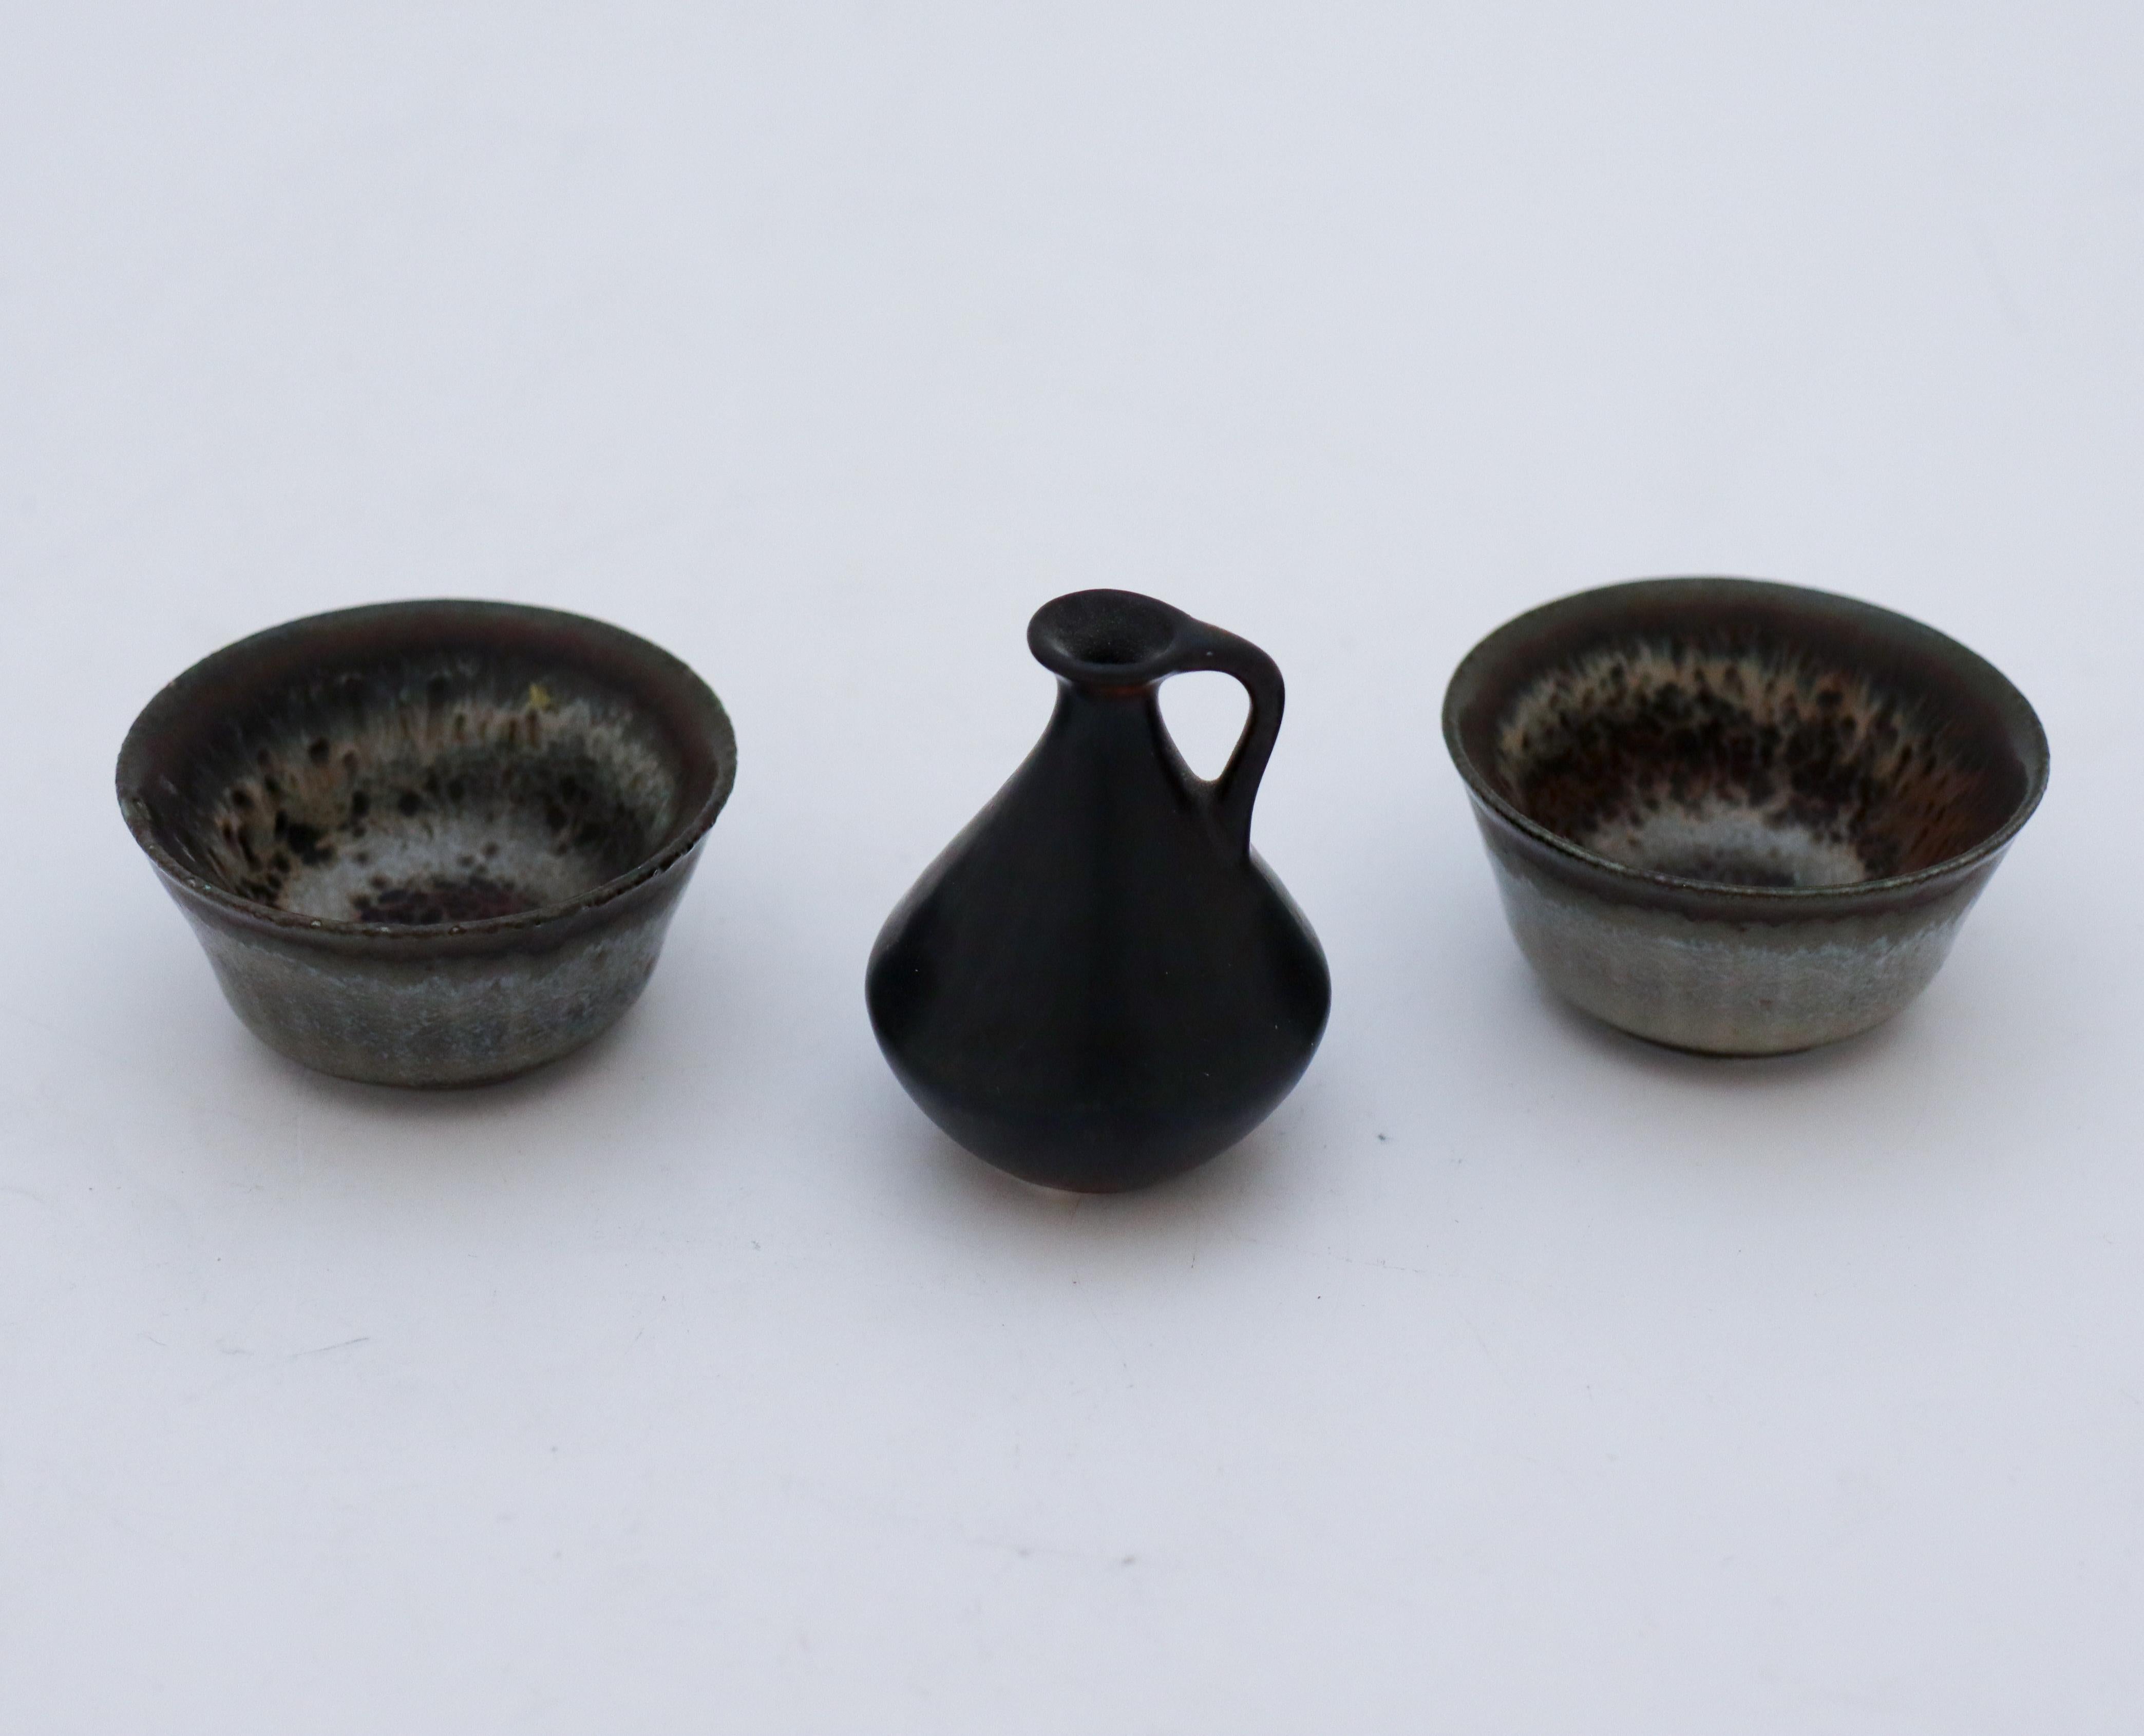 A set of 3 miniatures designed by Carl-Harry Stålhane at Rörstrand, the vase is about 5 cm in diameter and 5 cm high and the bowls are about 5 cm in diameter. They are all in excellent condition and marked as 1st quality. 

Carl-Harry Stålhane is